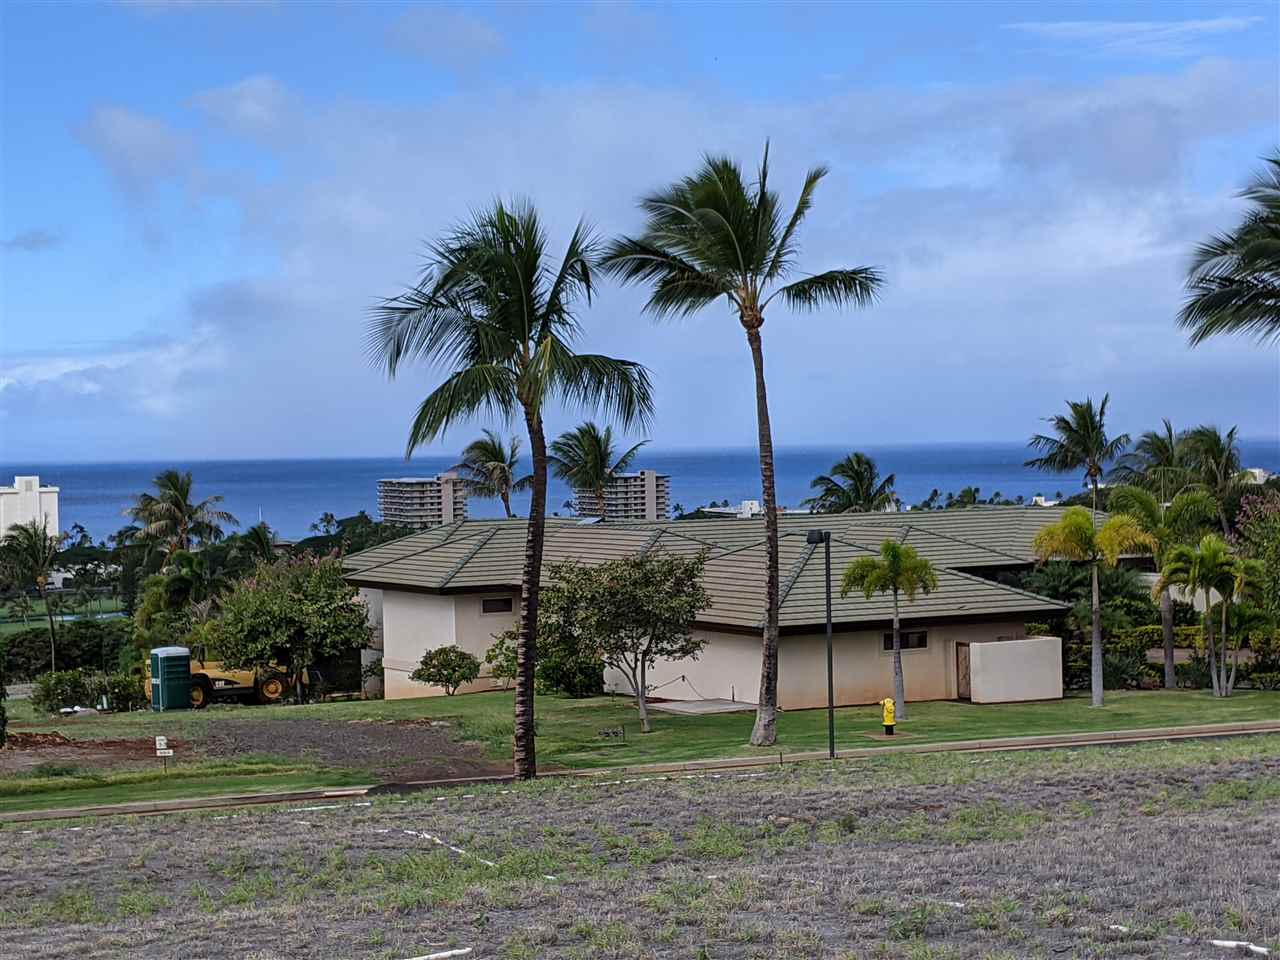 45 Lolii Pl 37 phase 1 Lahaina, Hi vacant land for sale - photo 3 of 13